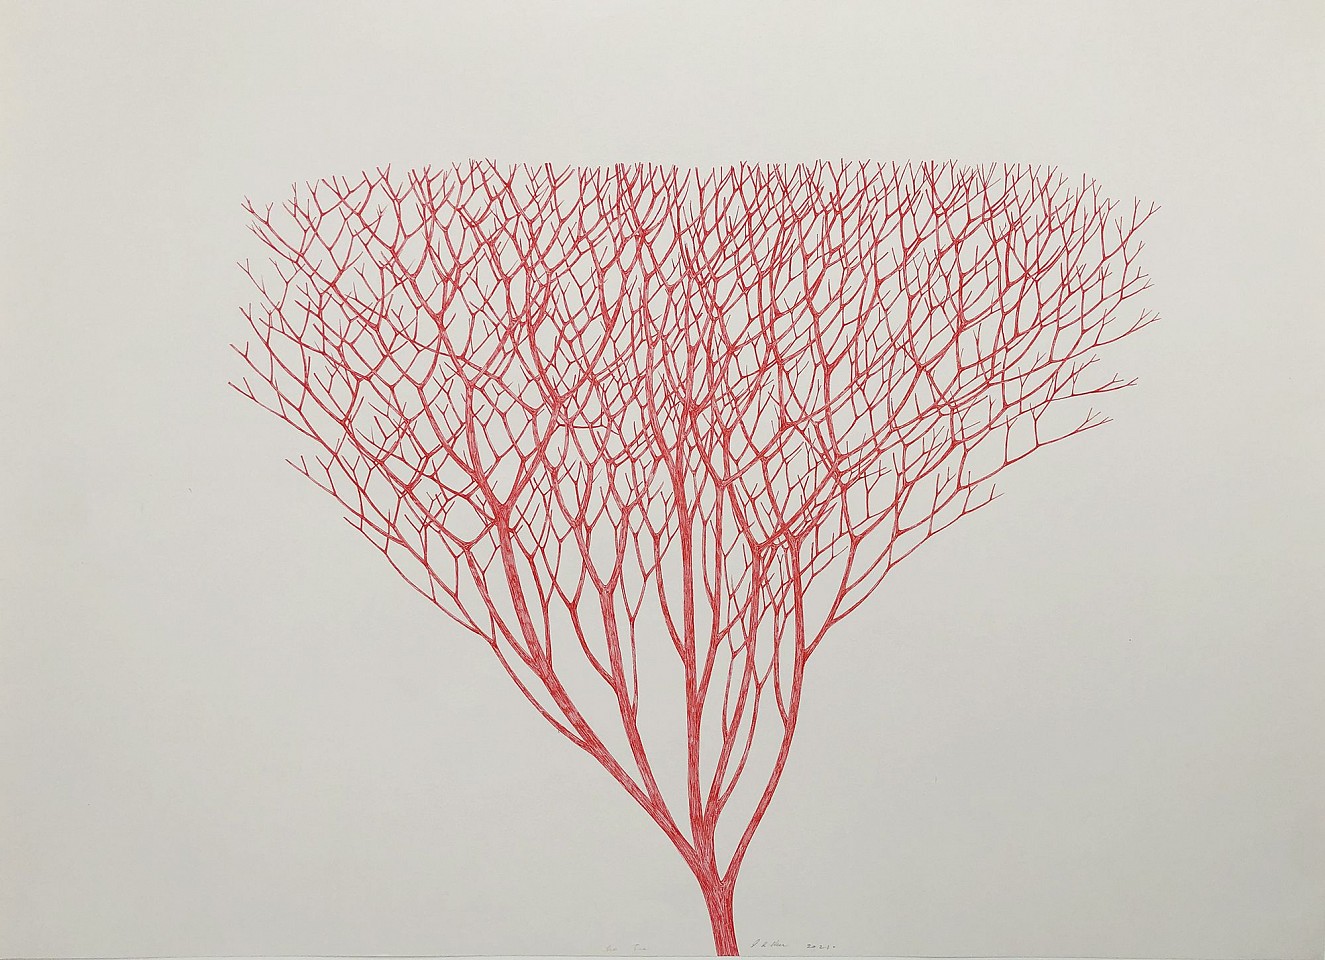 Stewart Helm, Red Tree, 2021
colored inks on paper, 22" x 30"
SH-630
Price Upon Request